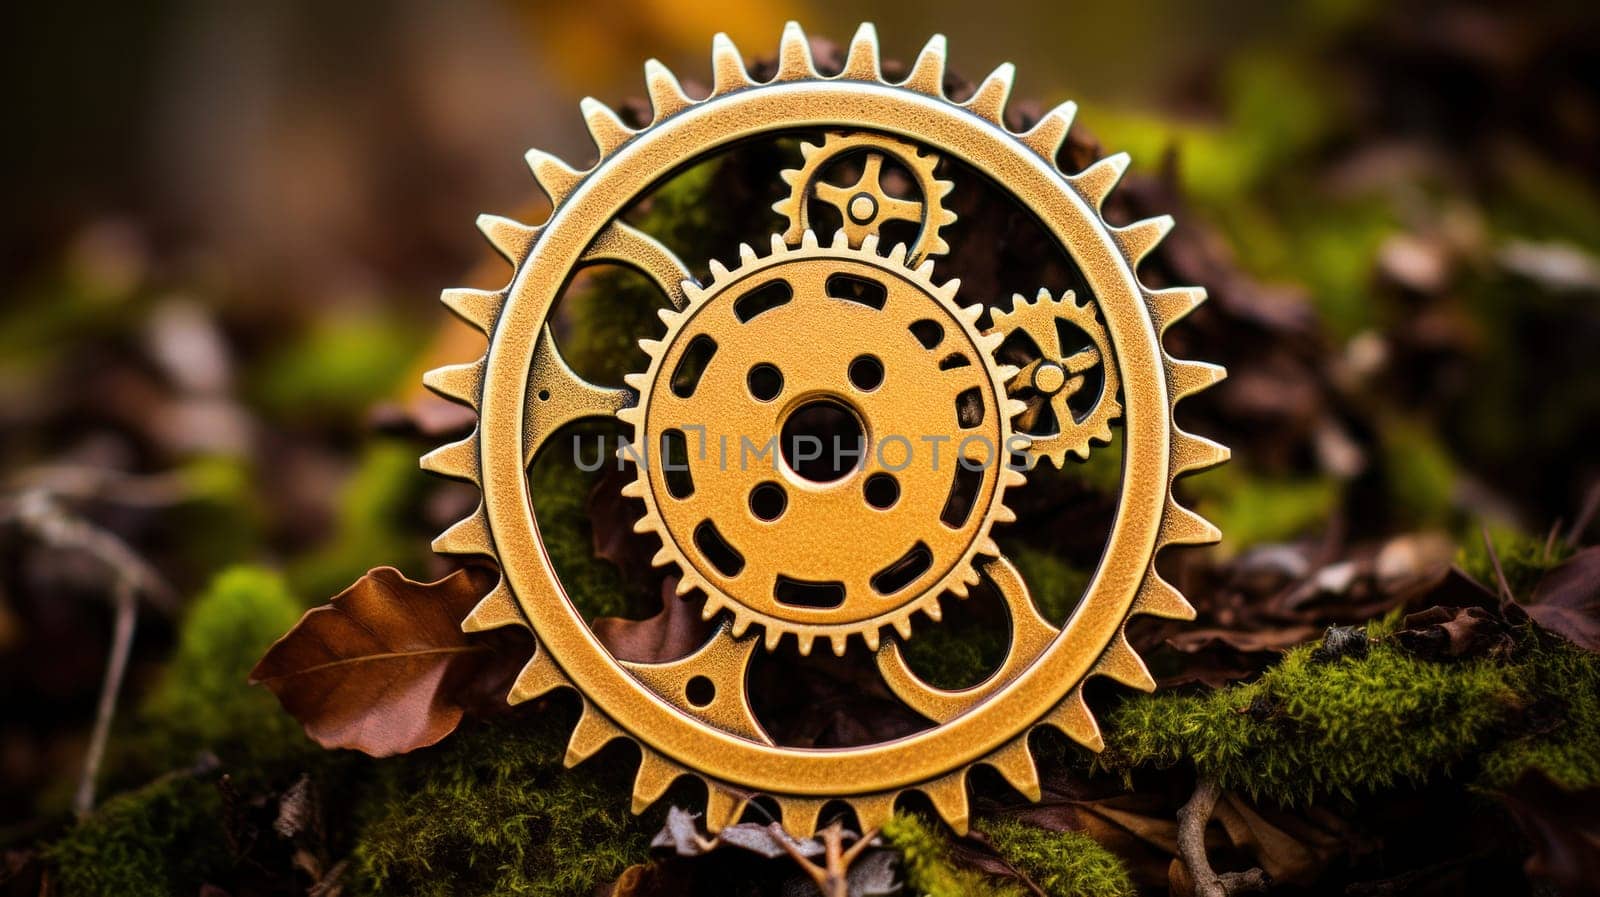 A gold colored gear wheel sitting on top of some moss